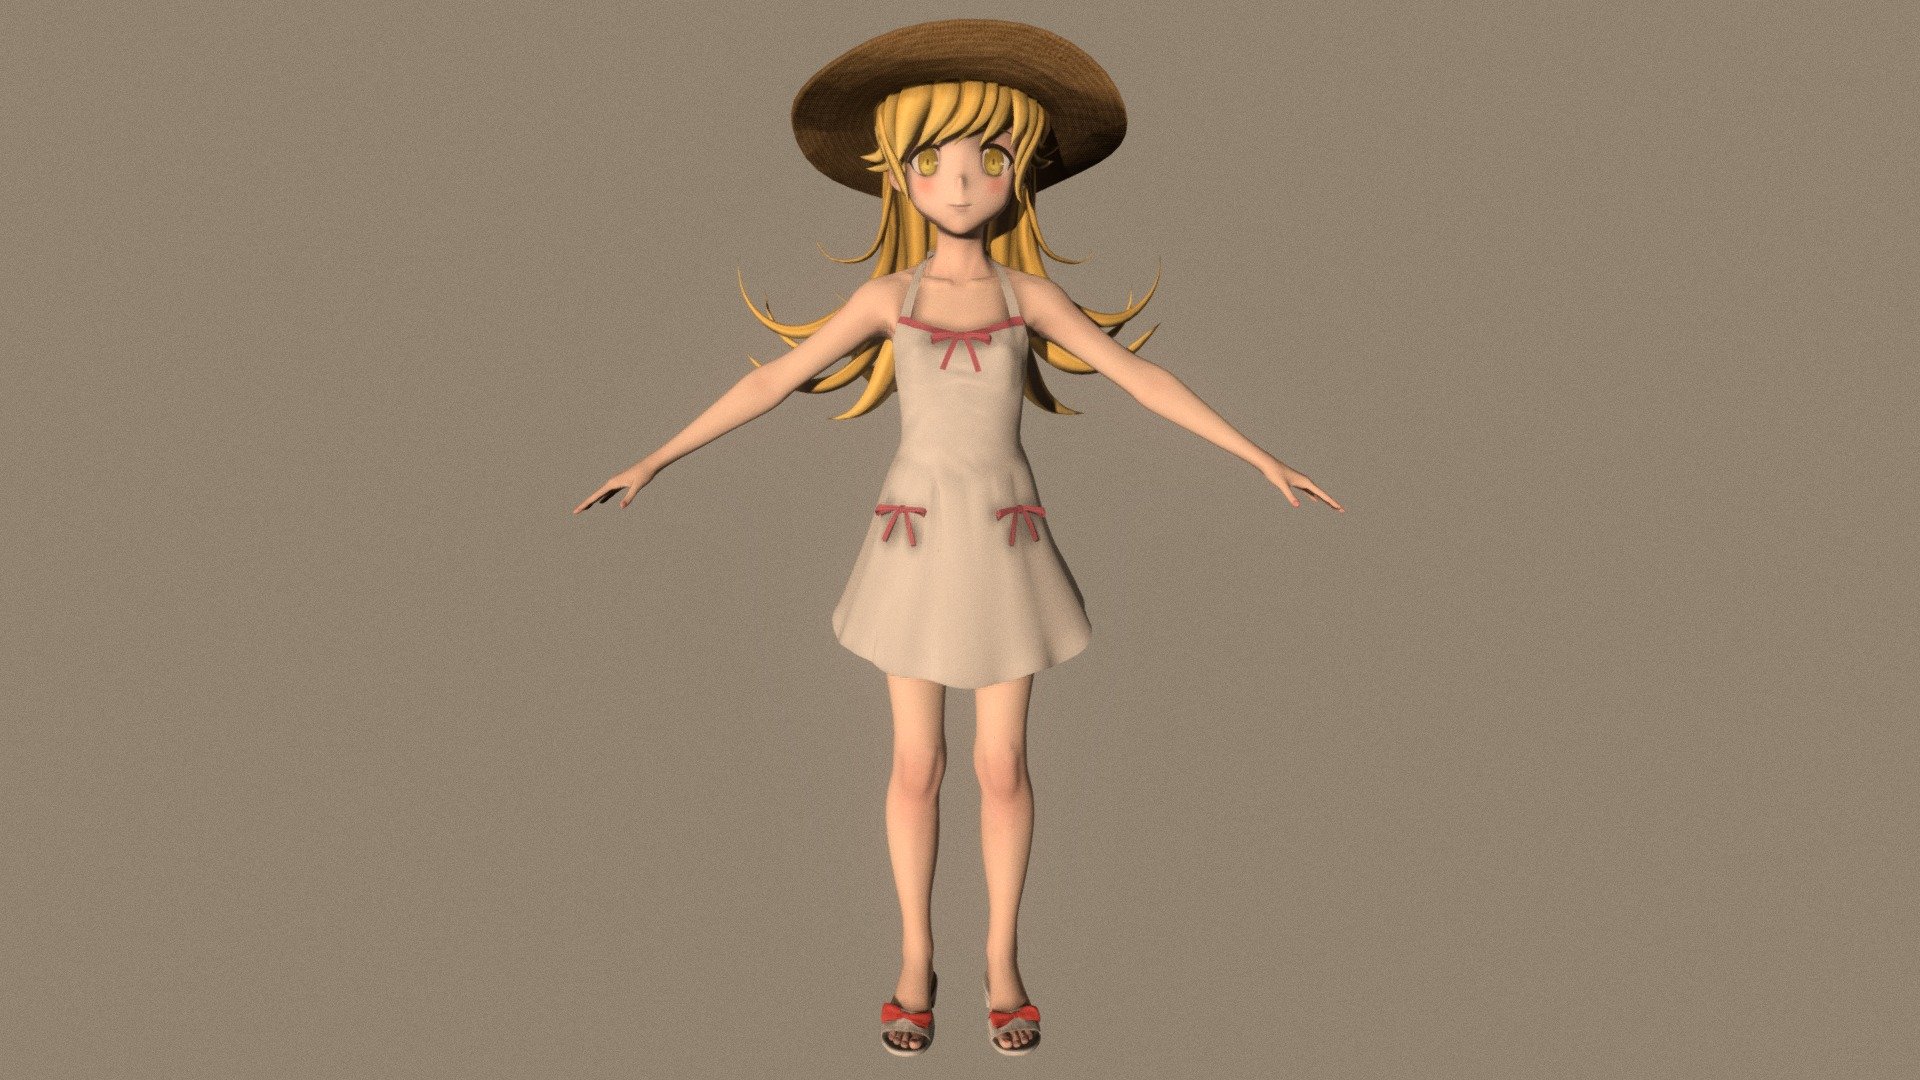 T-pose rigged model of anime girl Shinobu Oshino (Bakemonogatari).

Body and clothings are rigged and skinned by 3ds Max CAT system.

Eye direction and facial animation controlled by Morpher modifier / Shape Keys / Blendshape.

This product include .FBX (ver. 7200) and .MAX (ver. 2010) files.

3ds Max version is turbosmoothed to give a high quality render (as you can see here).

Original main body mesh have ~7.000 polys.

This 3D model may need some tweaking to adapt the rig system to games engine and other platforms.

I support convert model to various file formats (the rig data will be lost in this process): 3DS; AI; ASE; DAE; DWF; DWG; DXF; FLT; HTR; IGS; M3G; MQO; OBJ; SAT; STL; W3D; WRL; X.

You can buy all of my models in one pack to save cost: https://sketchfab.com/3d-models/all-of-my-anime-girls-c5a56156994e4193b9e8fa21a3b8360b

And I can make commission models.

If you have any questions, please leave a comment or contact me via my email 3d.eden.project@gmail.com 3d model